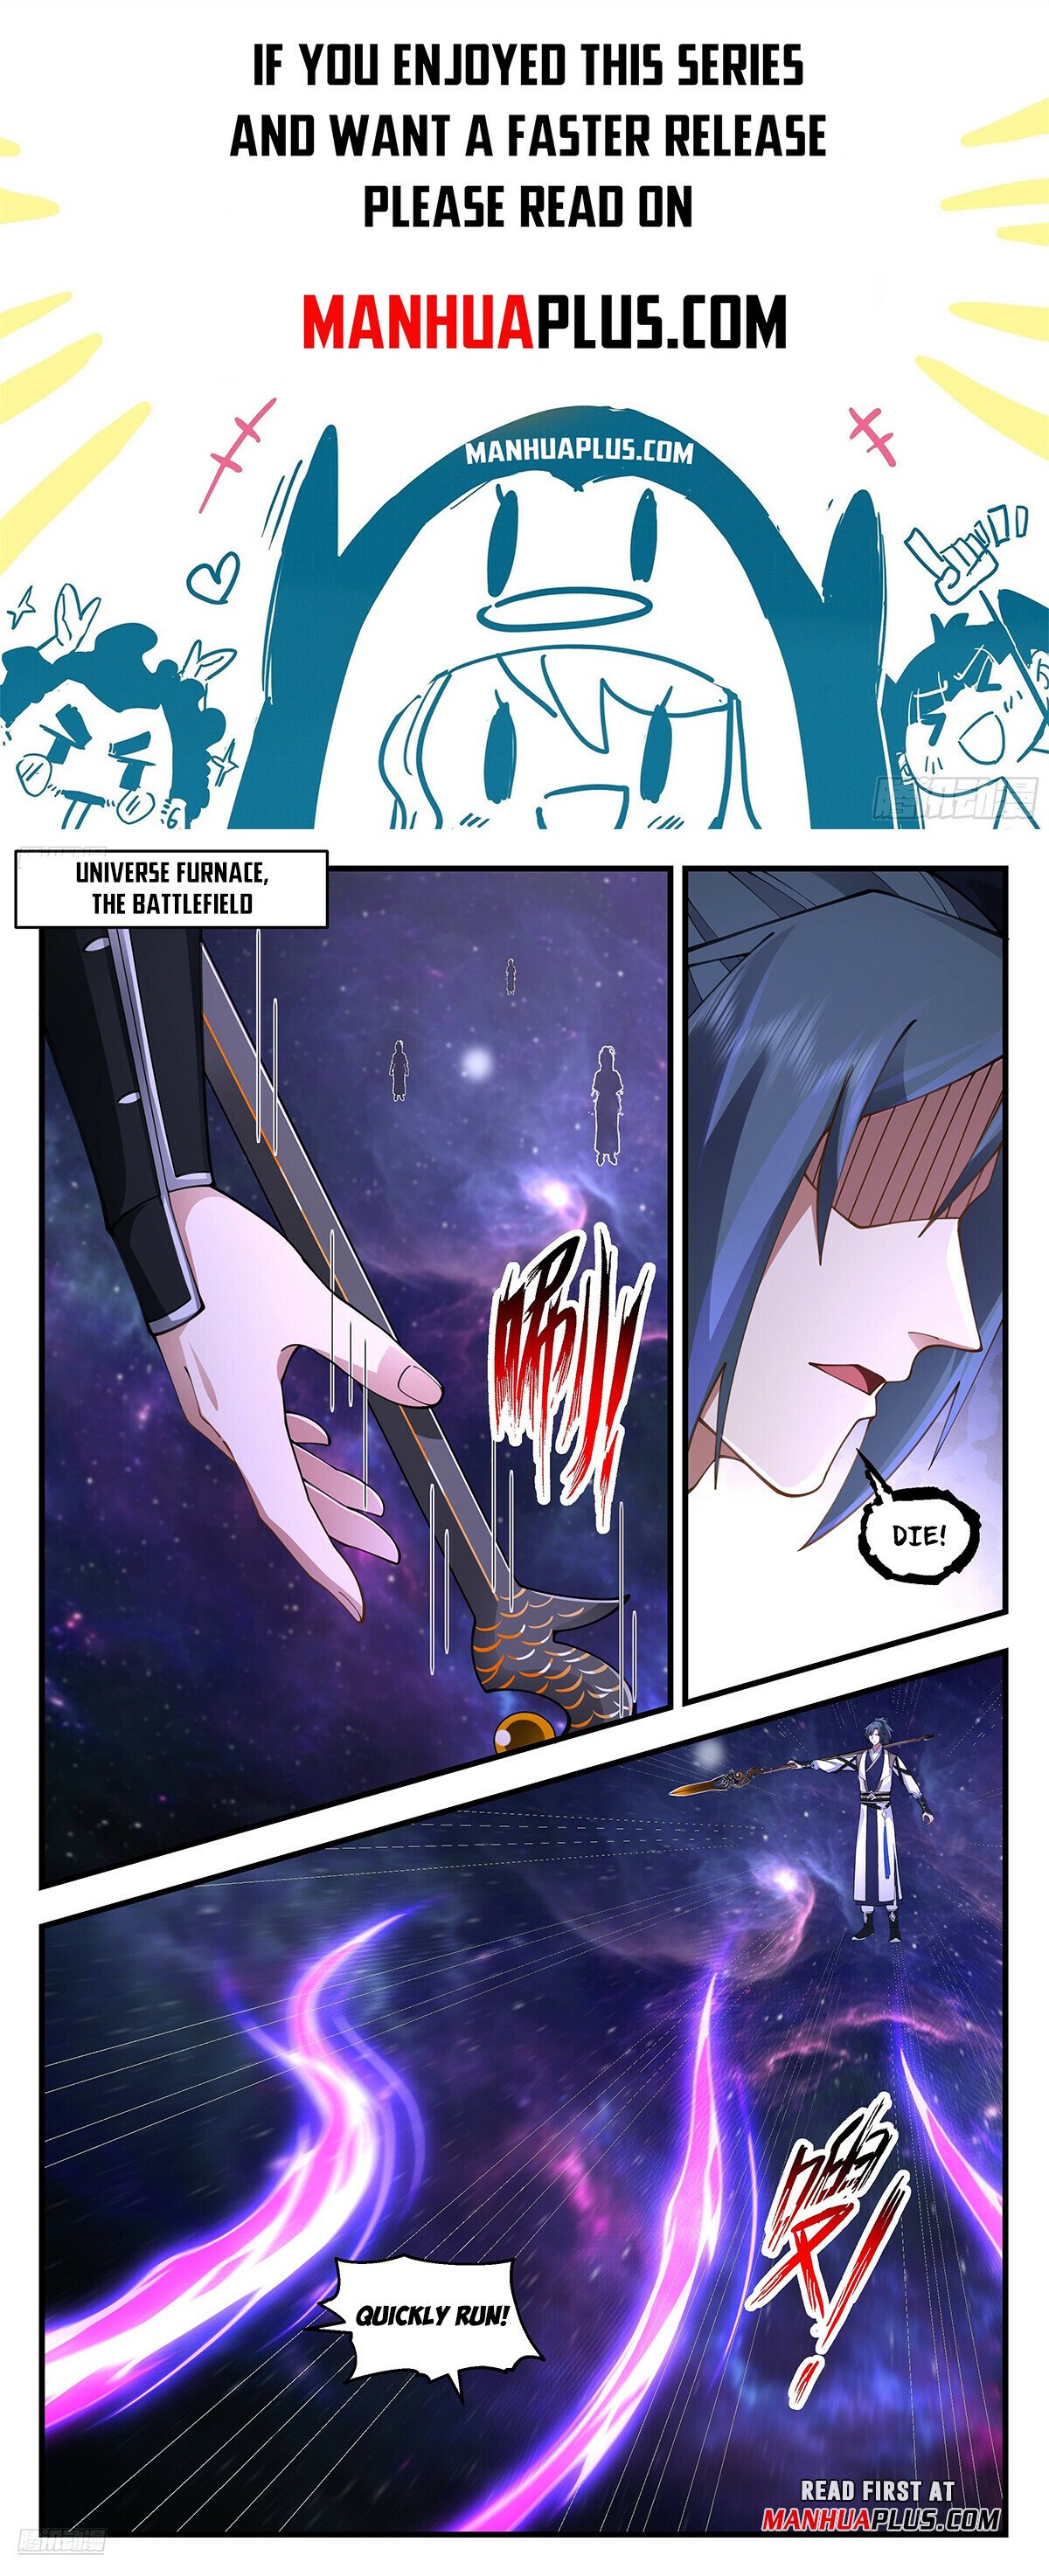 Martial Peak - Chapter 30456 - Finally Reaching The Ninth Rank - Image 1